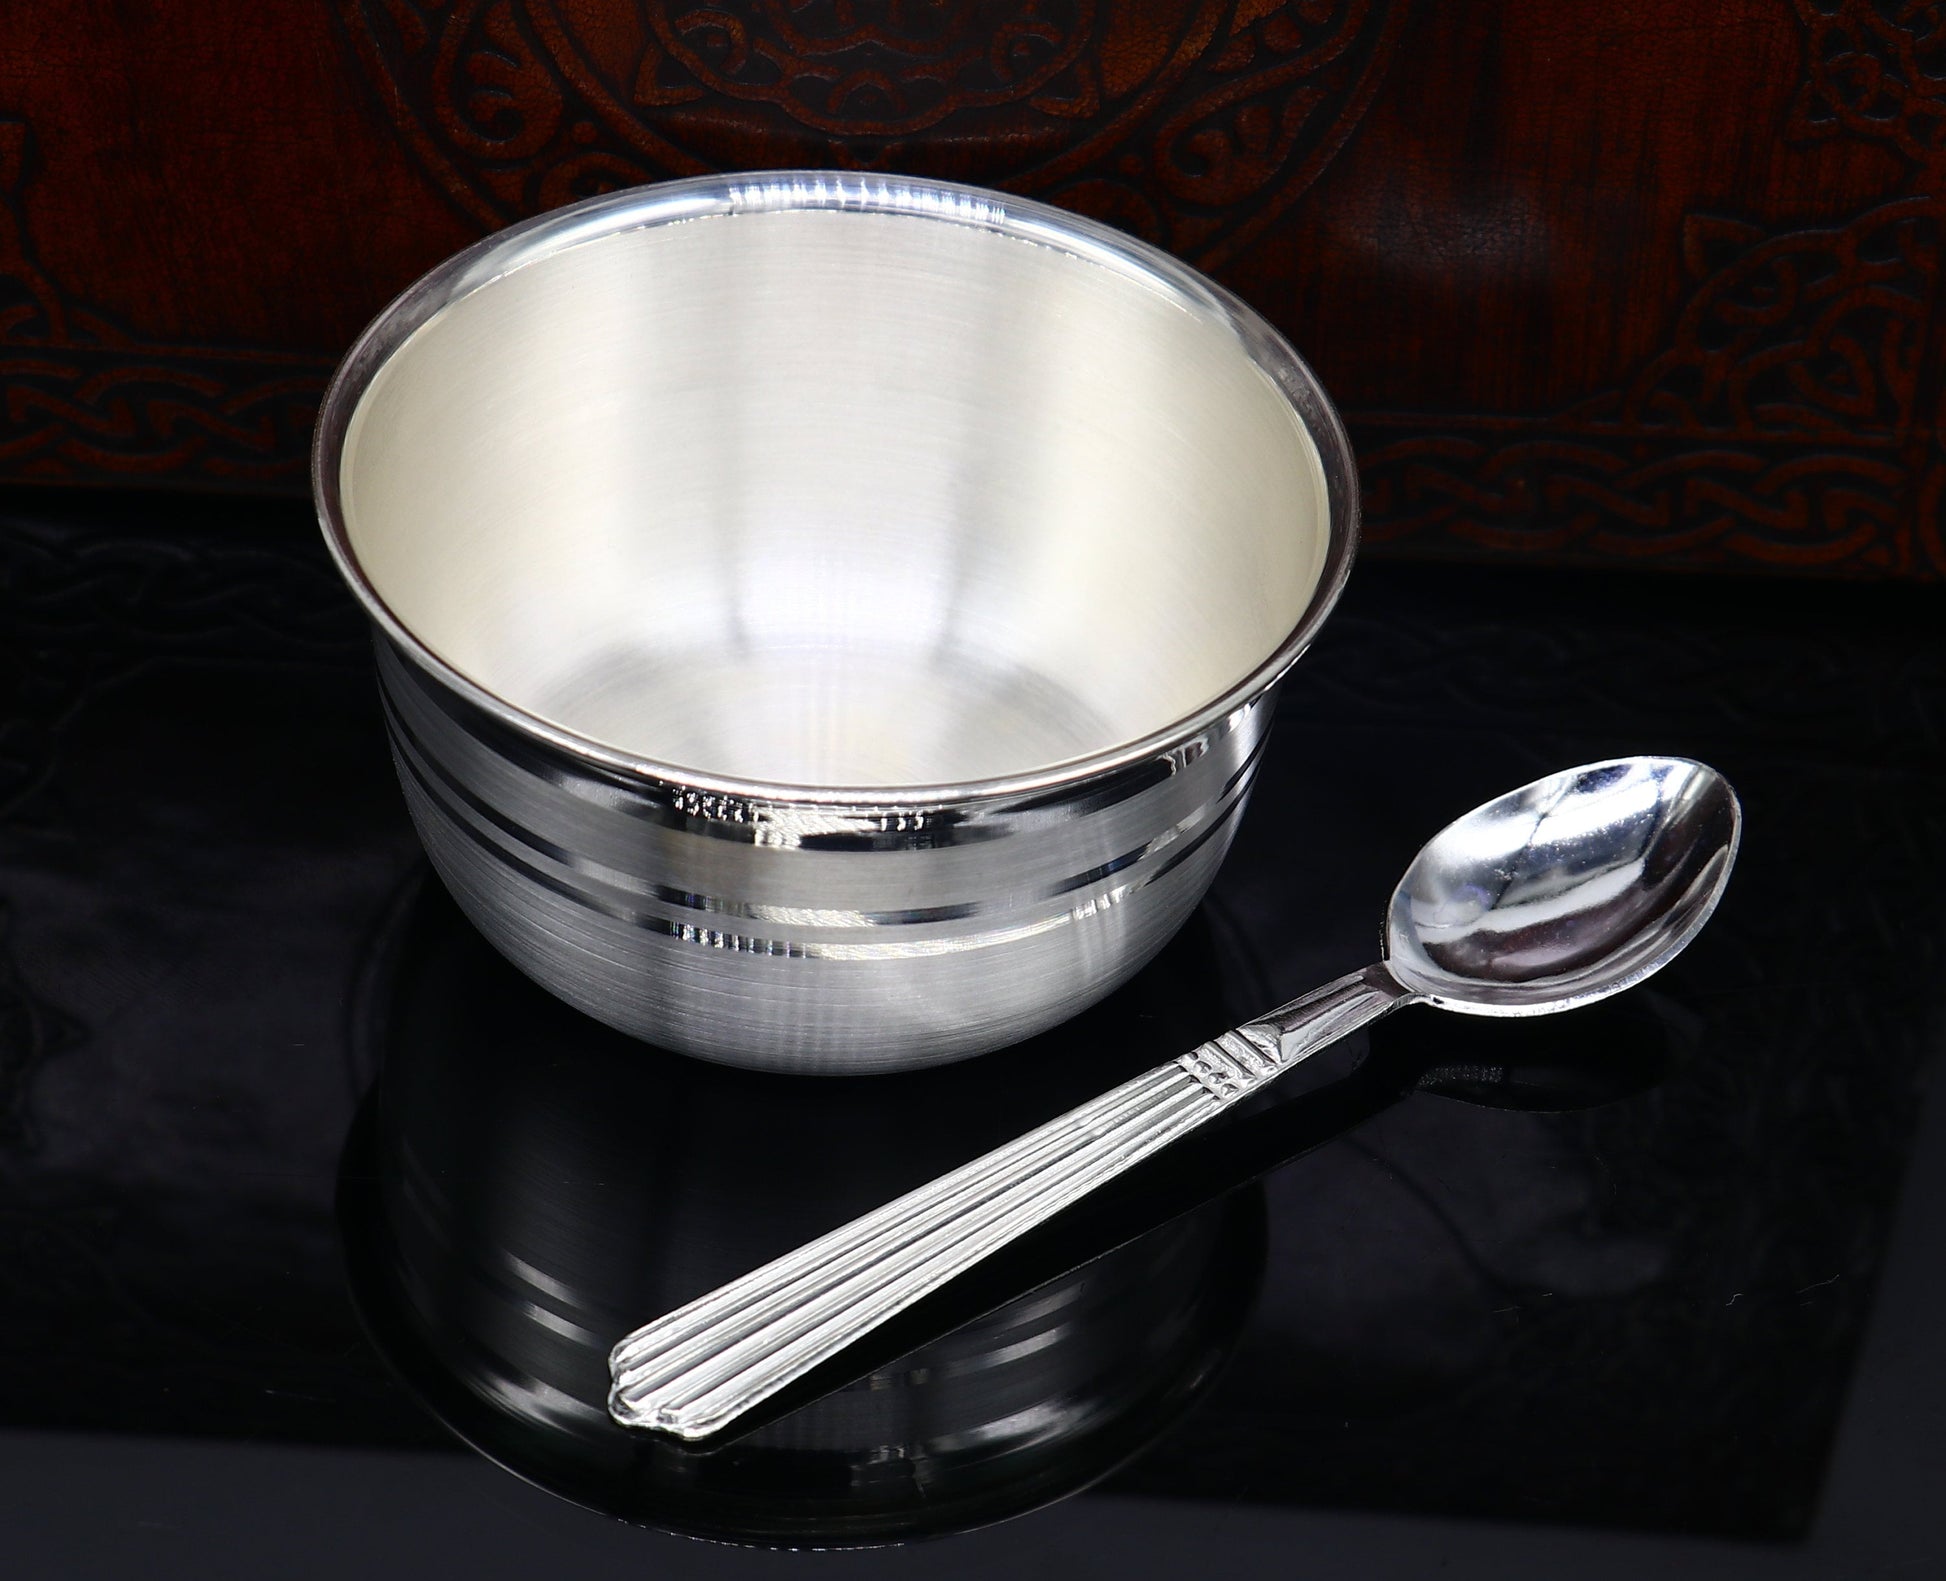 Handmade 99.9% Solid Pure Silver Baby Bowl With Small Spoon Silver Vessels,  Daily Use Silver Utensils for Your Healthy Baby or Kids Sv12 -  Norway